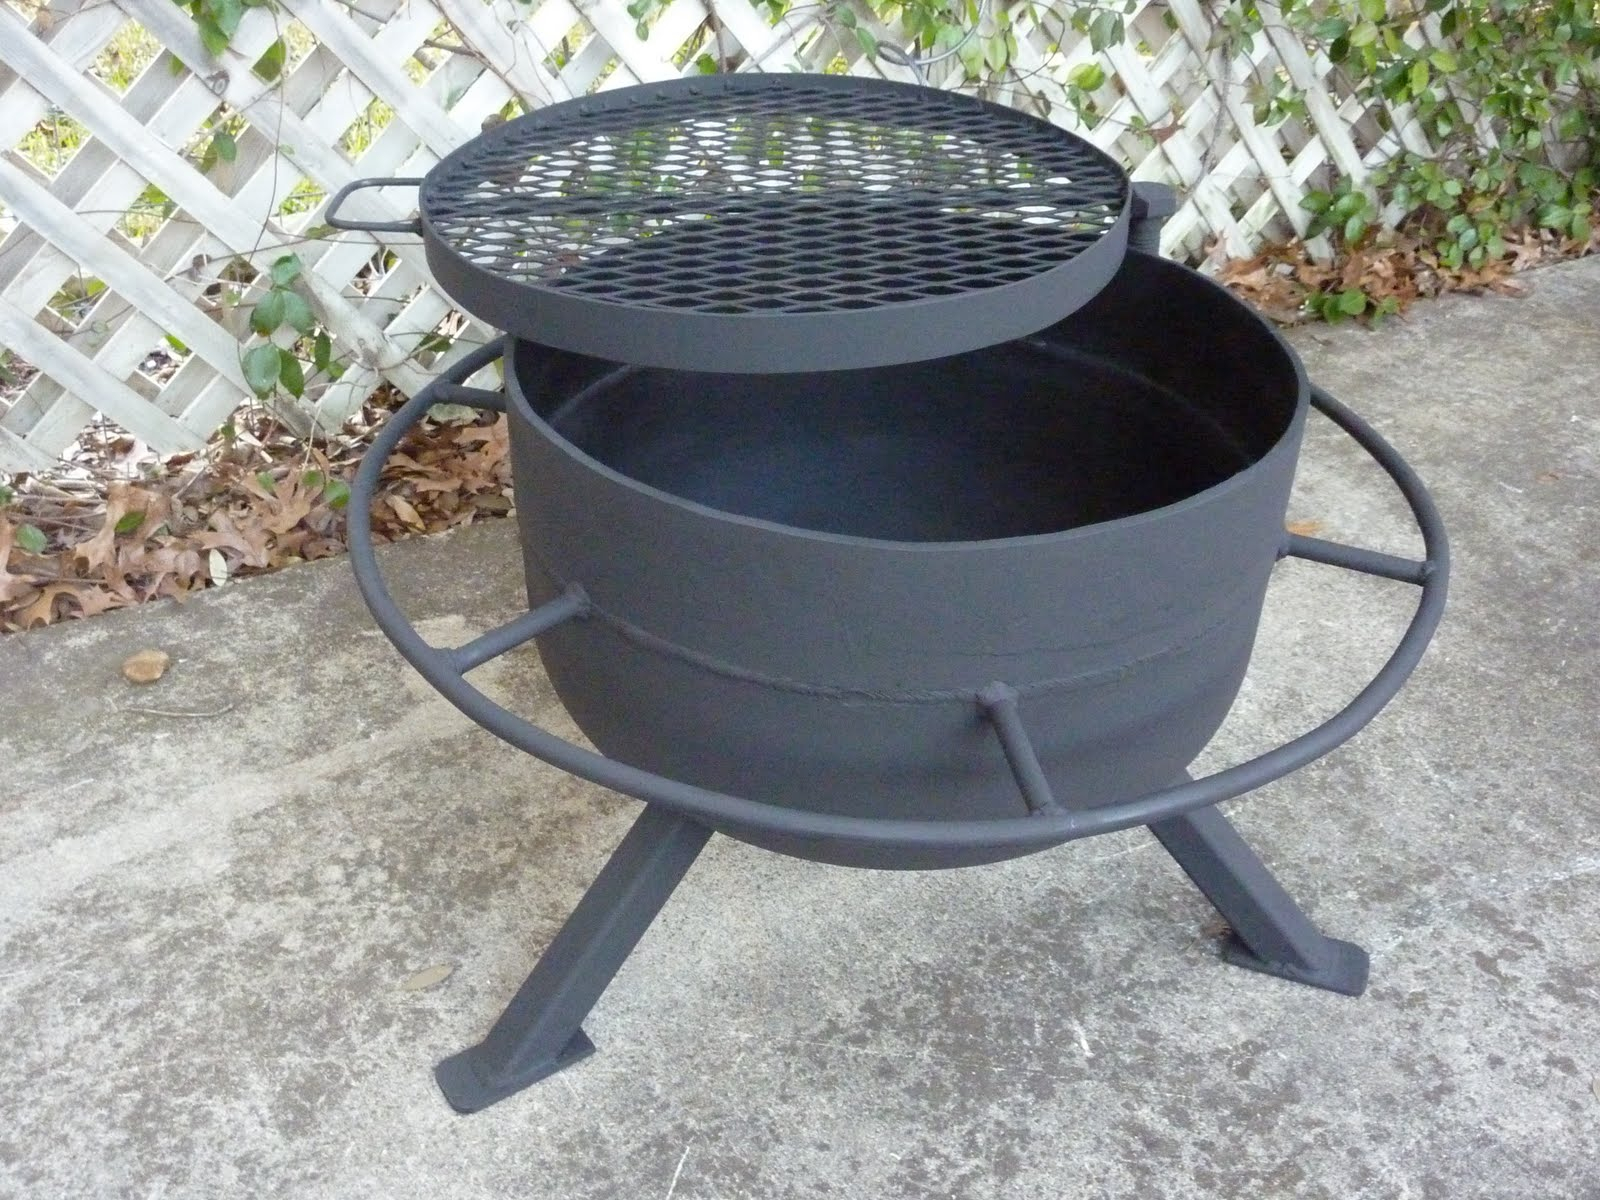 Jim Aderholds Welding And Metalworking Hob Fire Pit Project intended for size 1600 X 1200